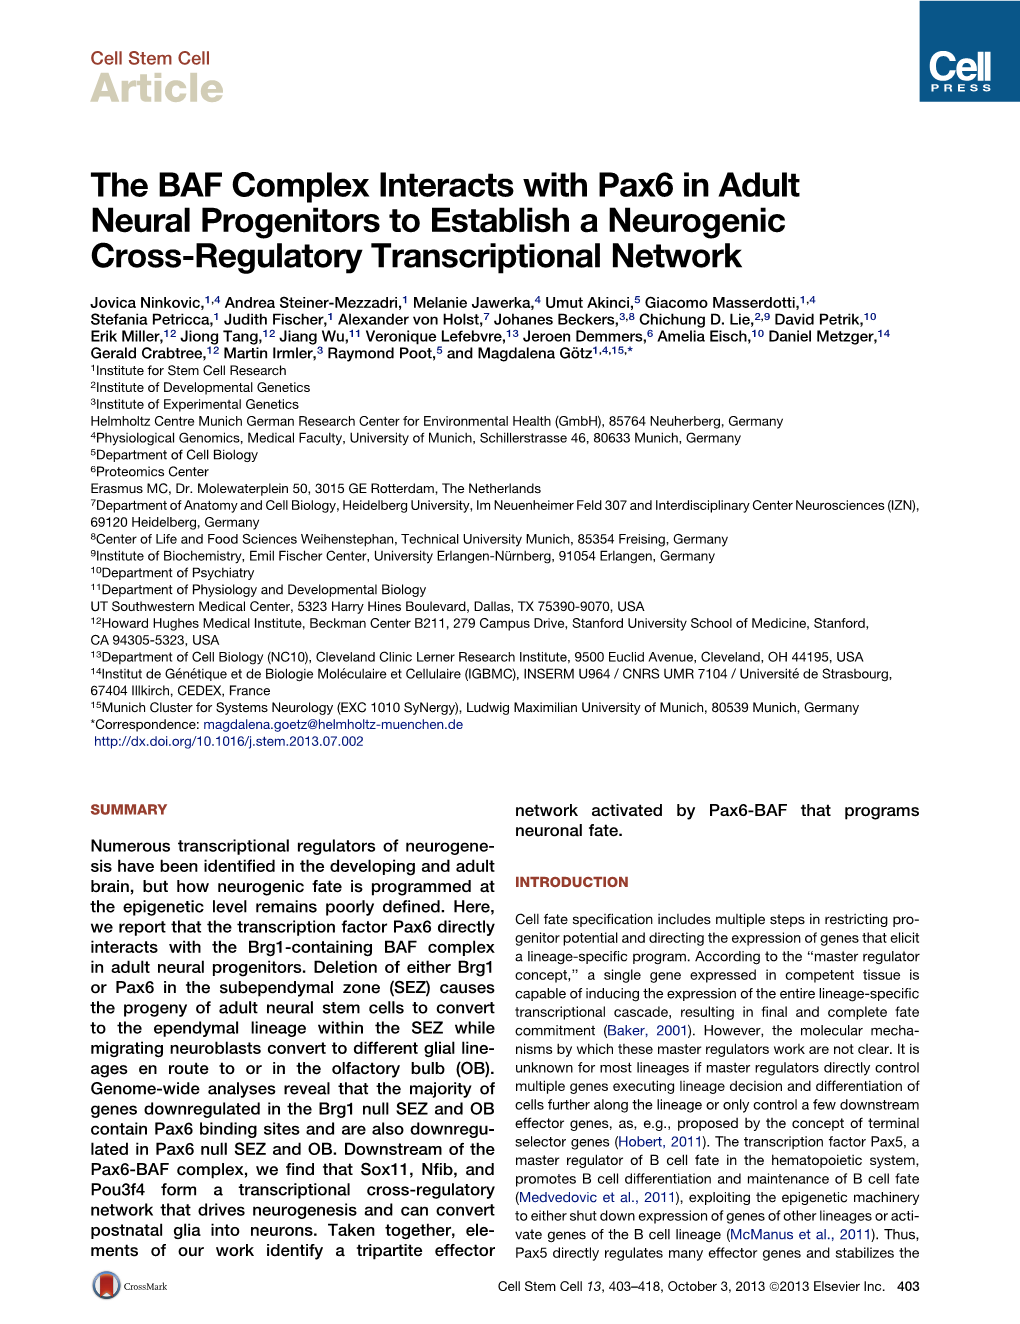 The BAF Complex Interacts with Pax6 in Adult Neural Progenitors to Establish a Neurogenic Cross-Regulatory Transcriptional Network